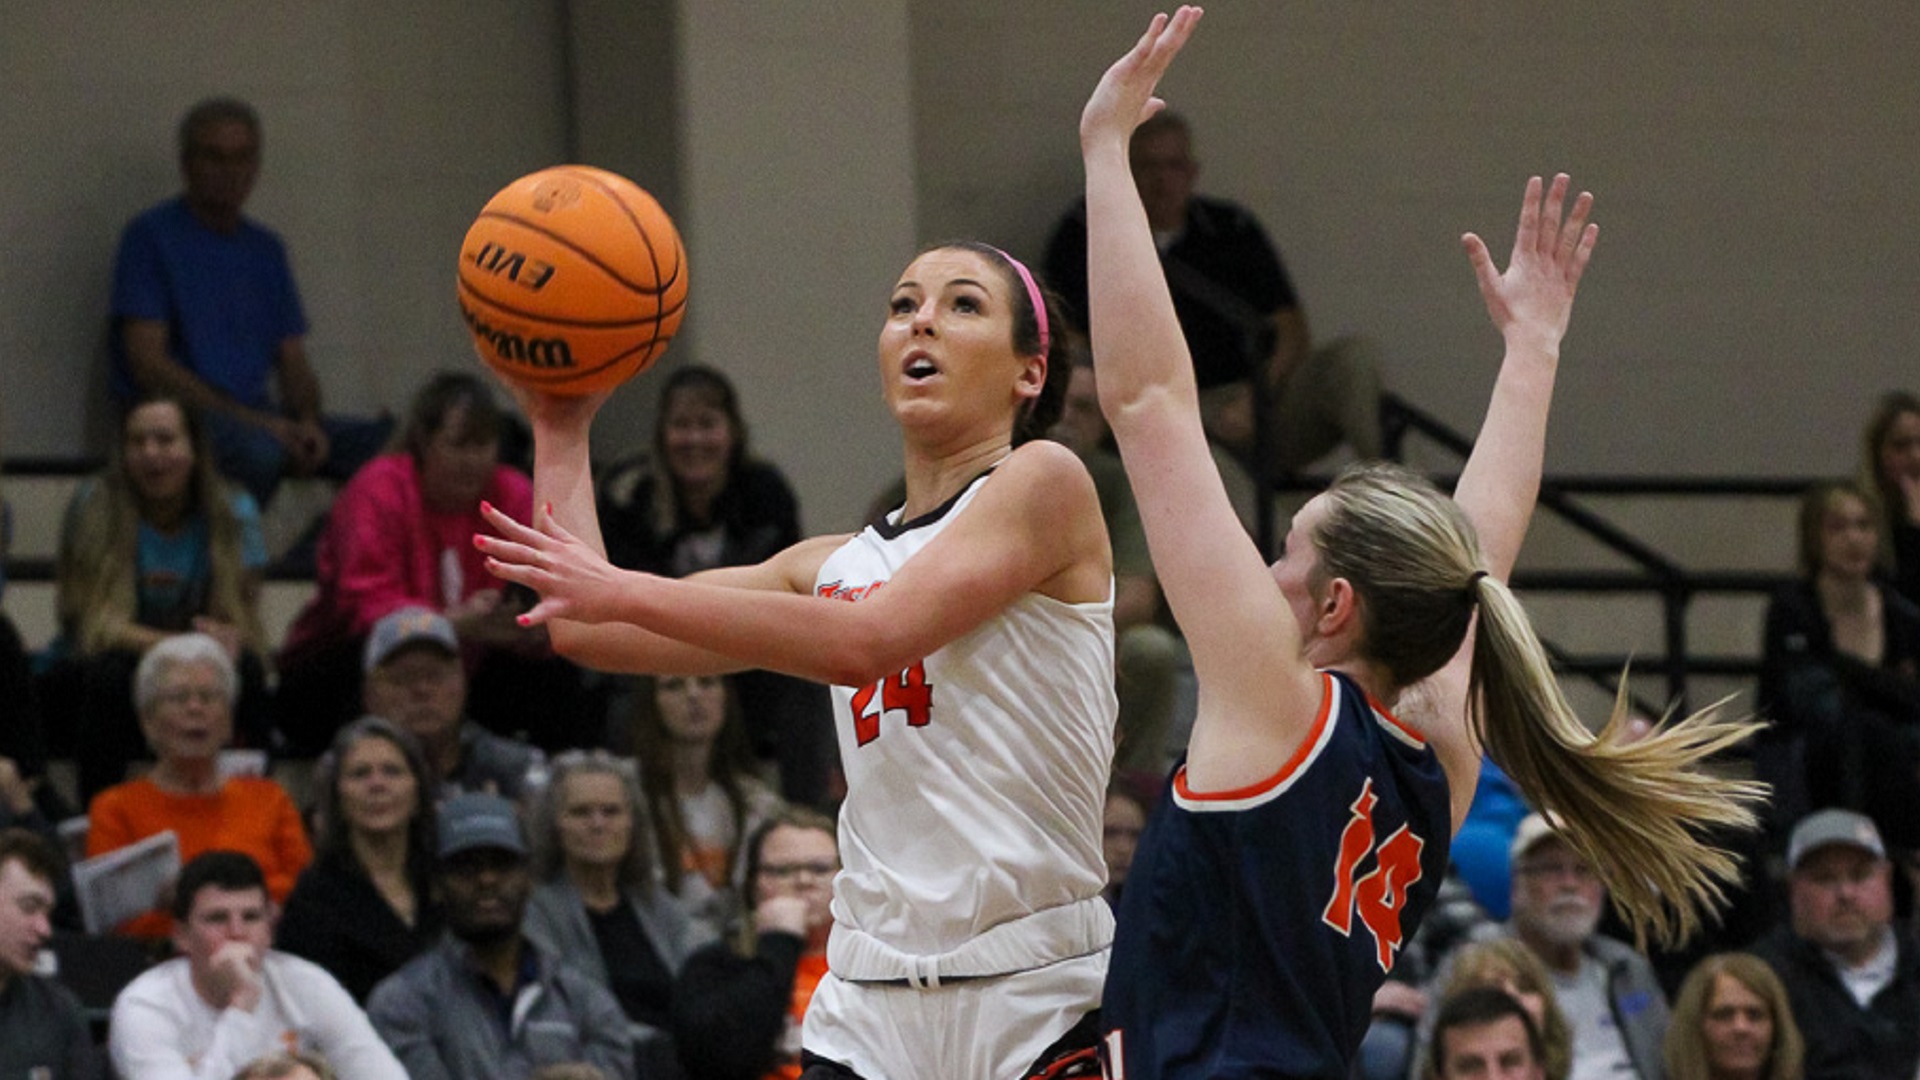 Blayre Shultz finished with a game-high 22 points against Carson-Newman (photo by Kari Ham)